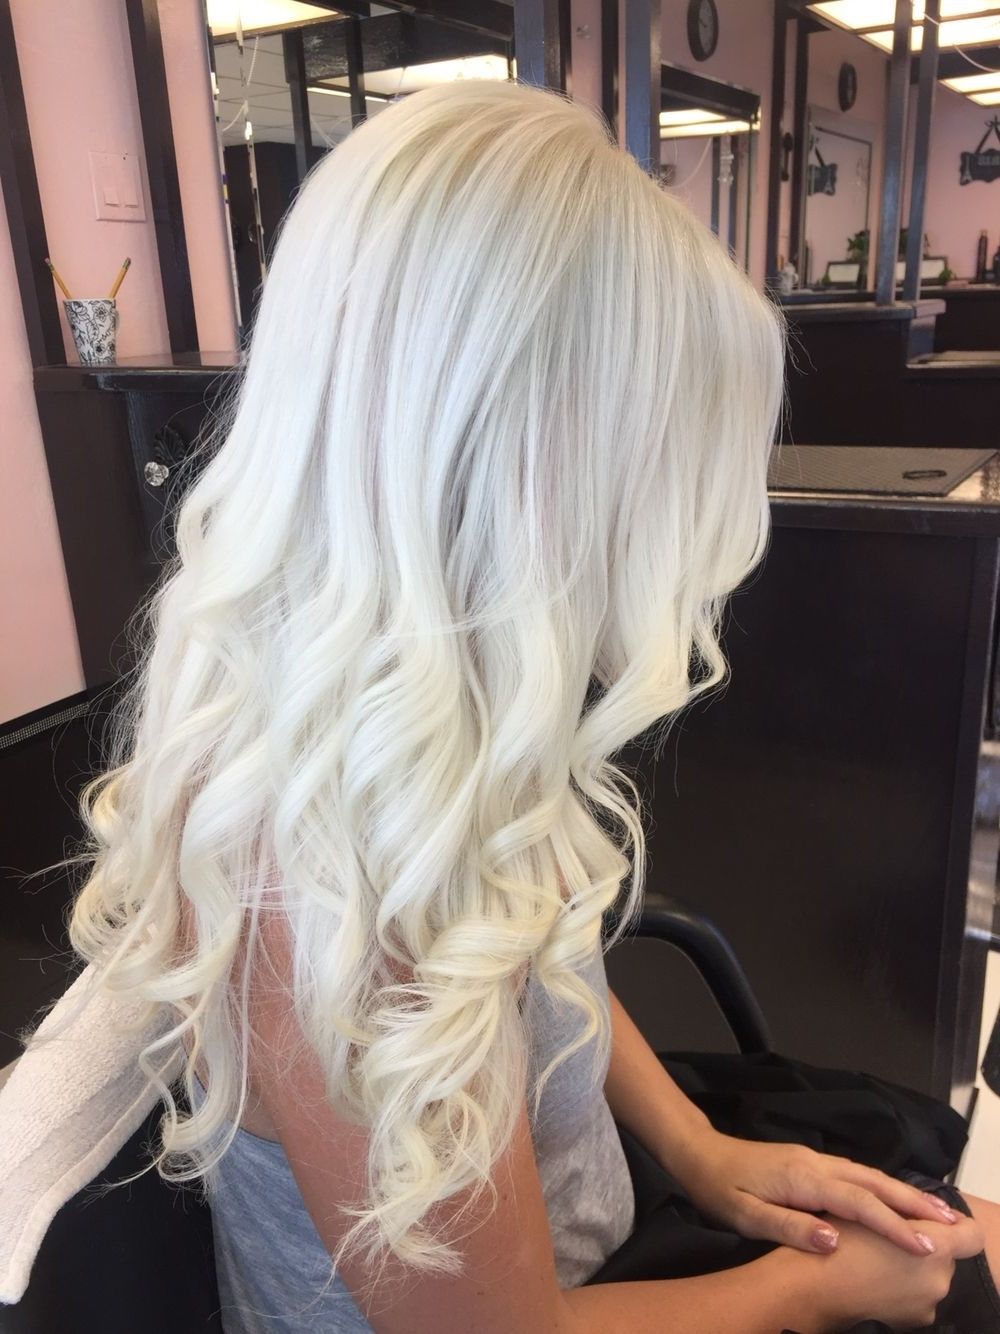 Most Recent Glamorous Silver Blonde Waves Hairstyles Inside Pinmellony Kailey On Hair Styles (View 4 of 20)